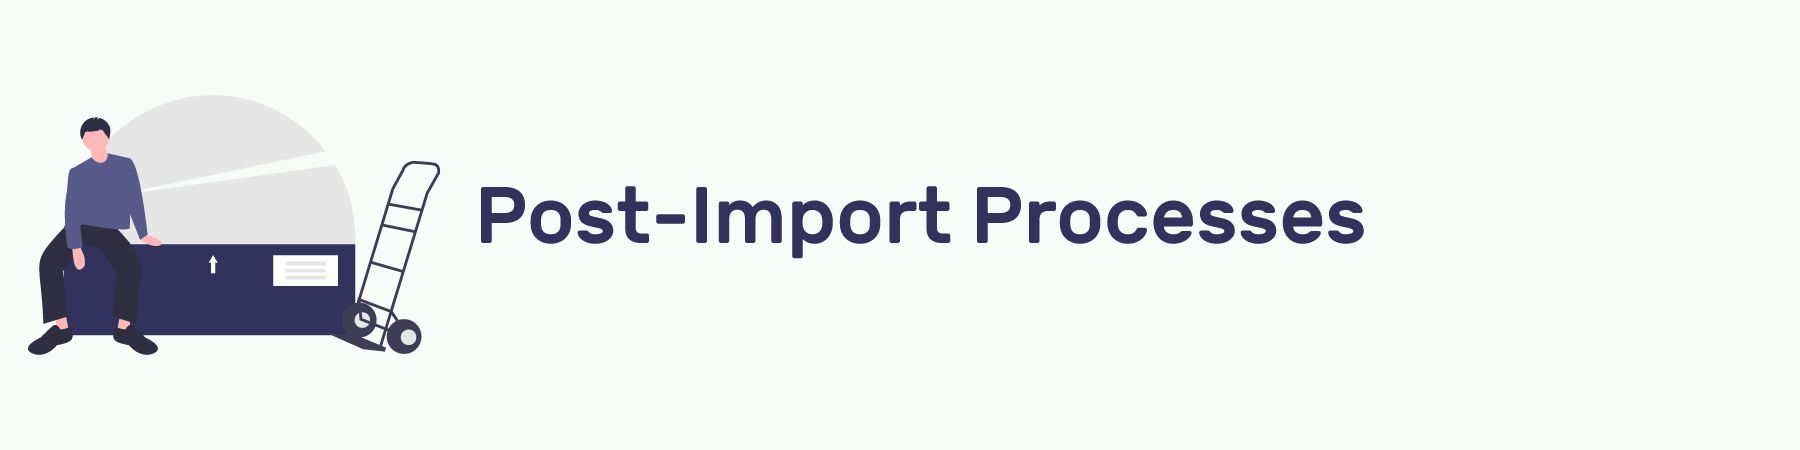 Post-Import Processes Section Header